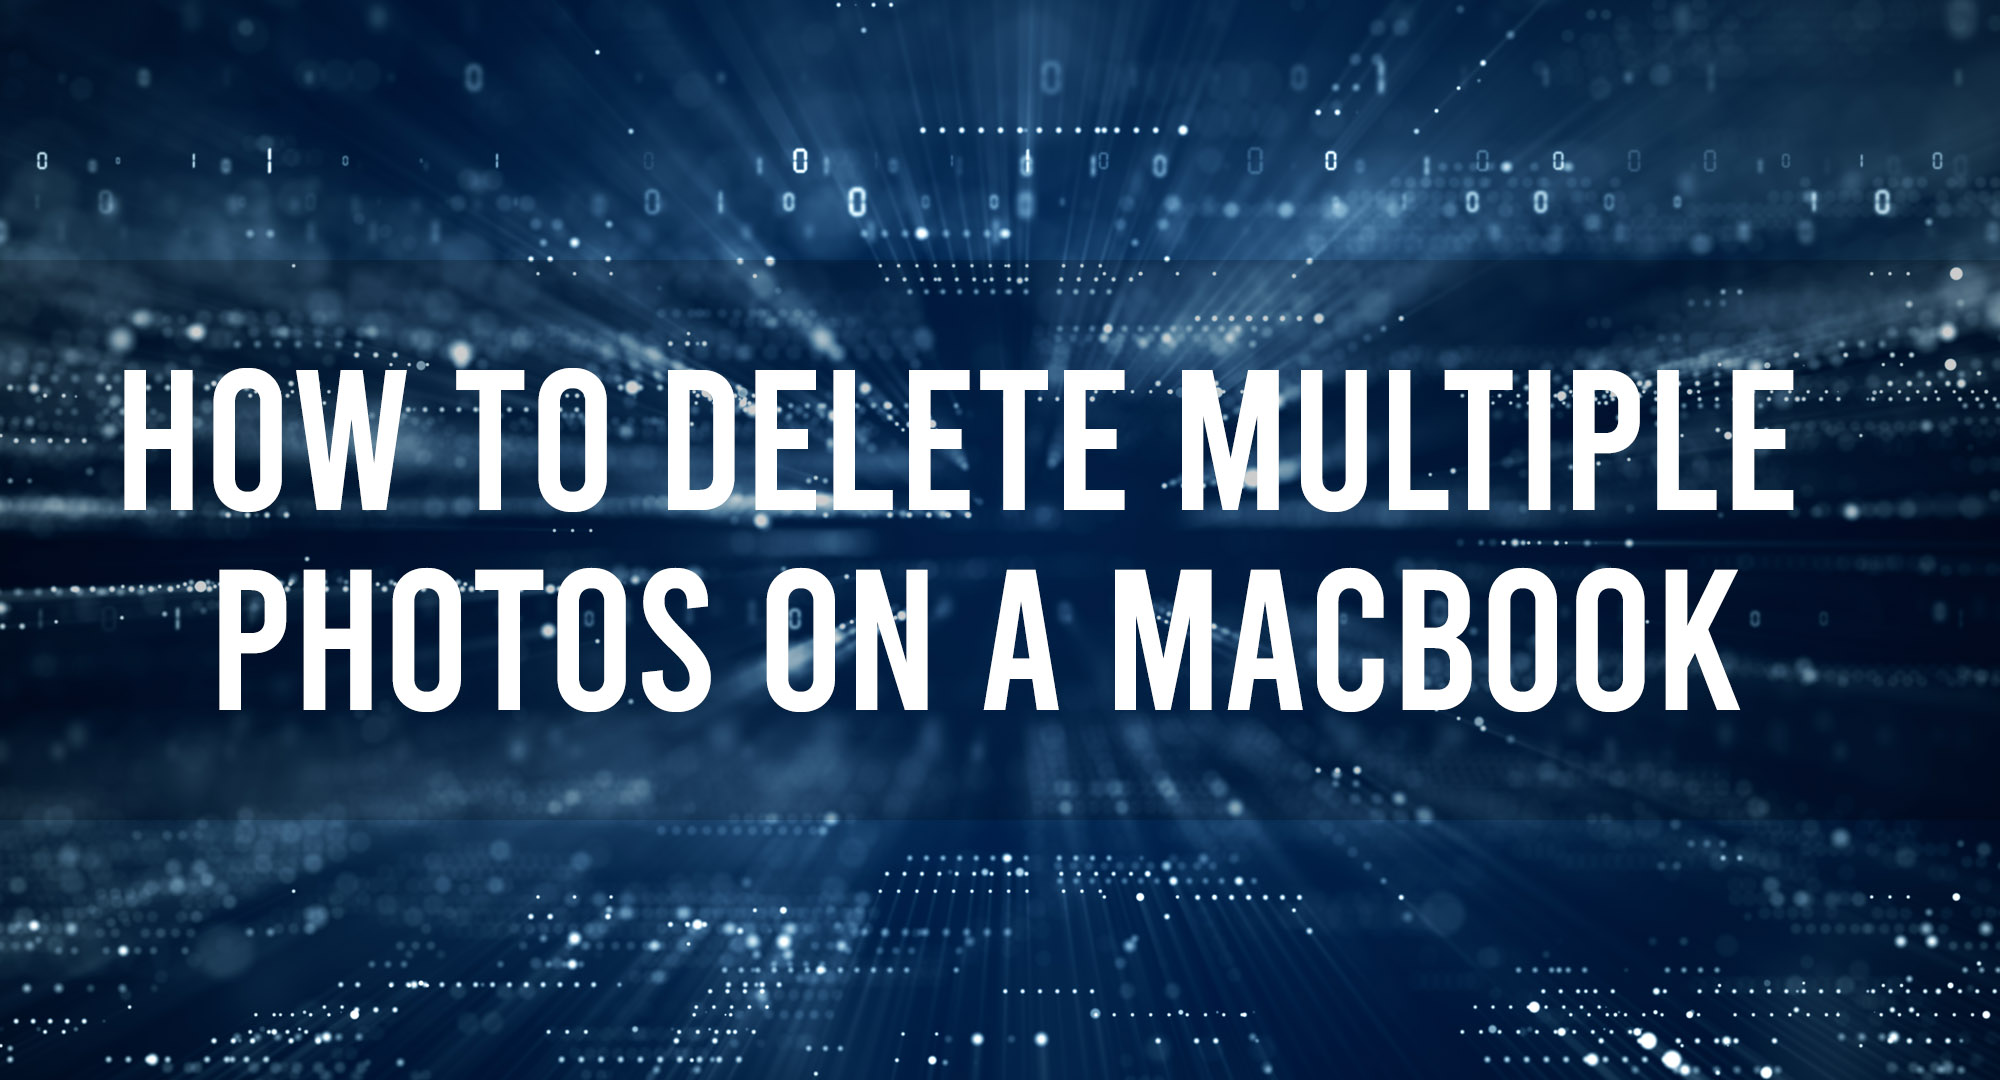 How to delete multiple photos on a macbook